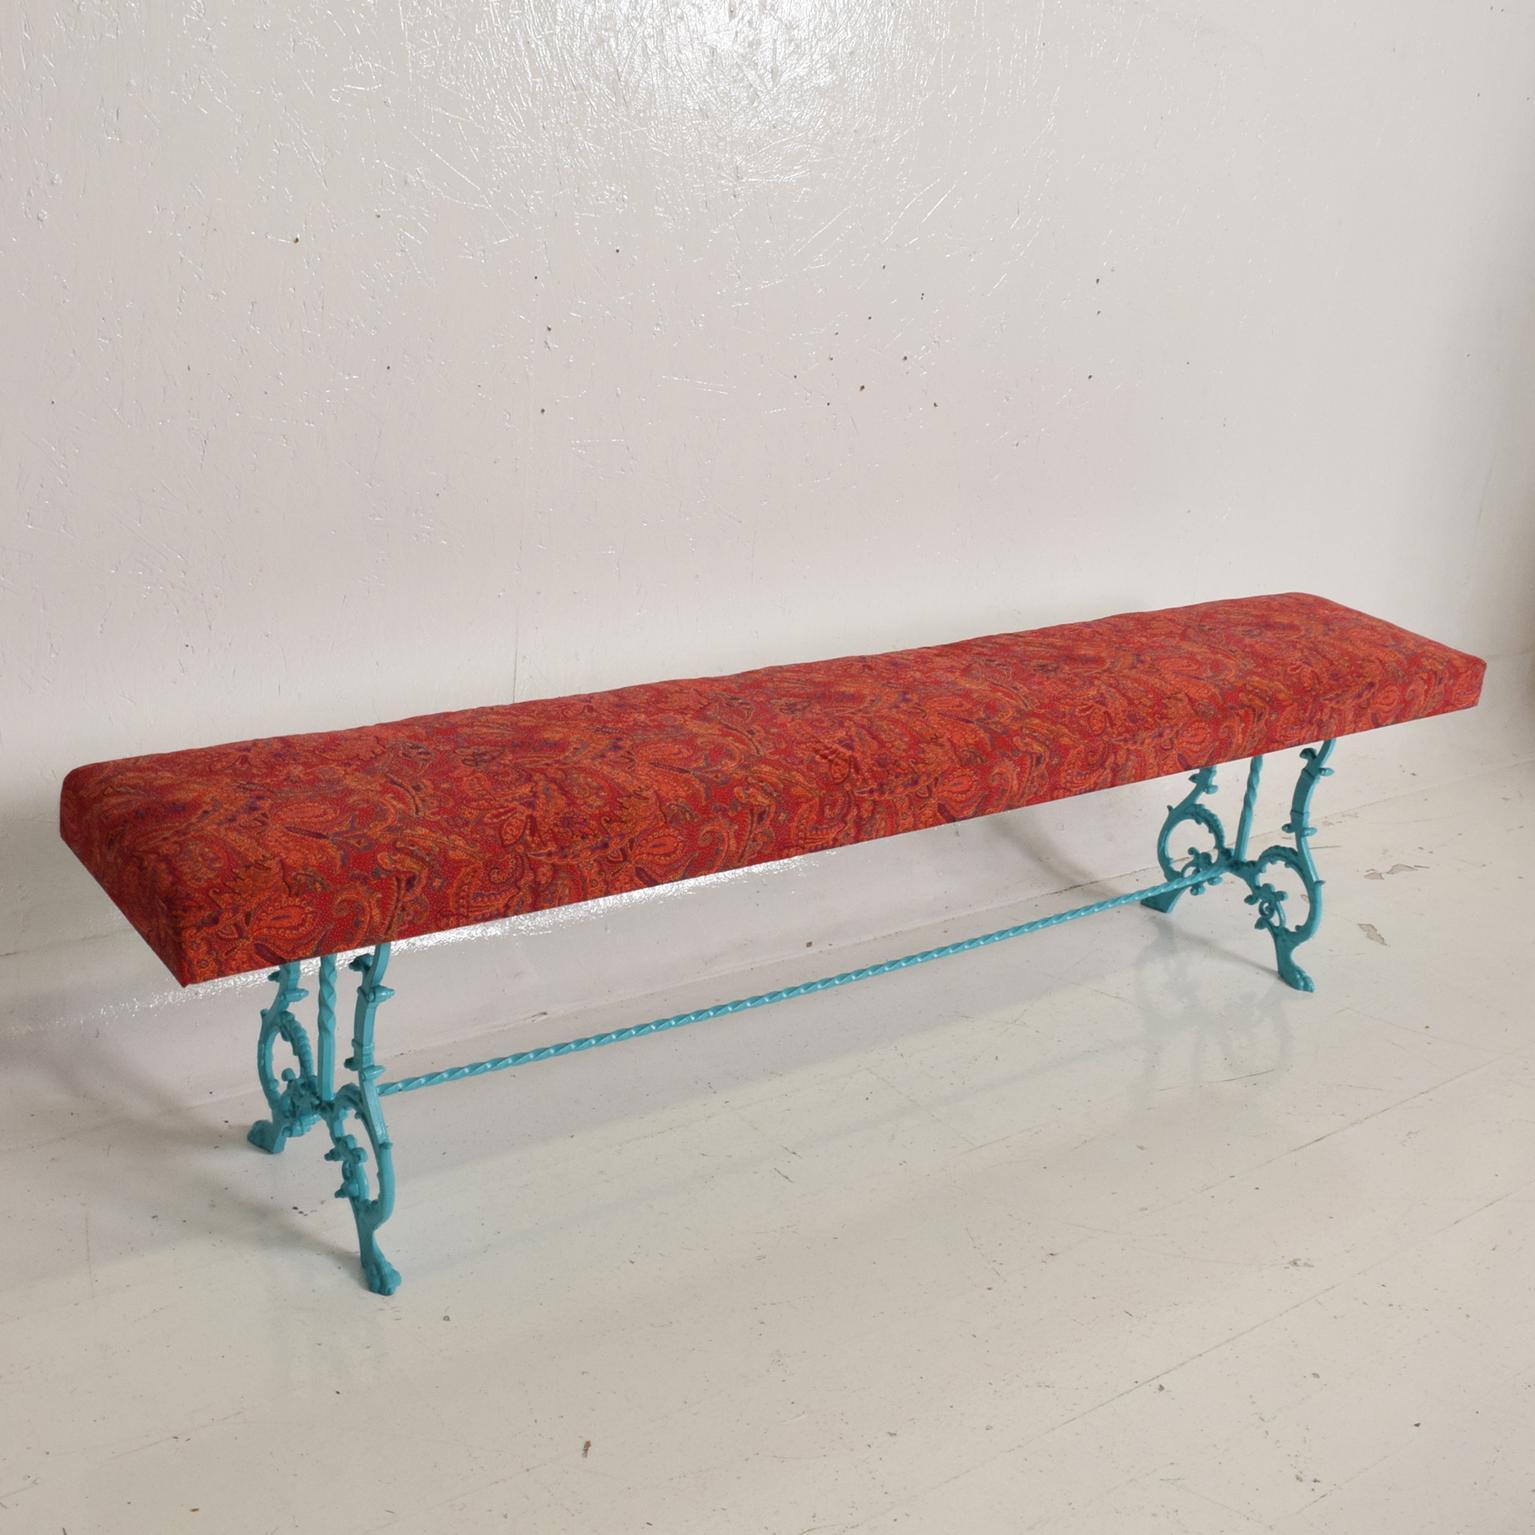 Textile 1970s Scrolled Wrought Iron Bench New Paisley Upholstery